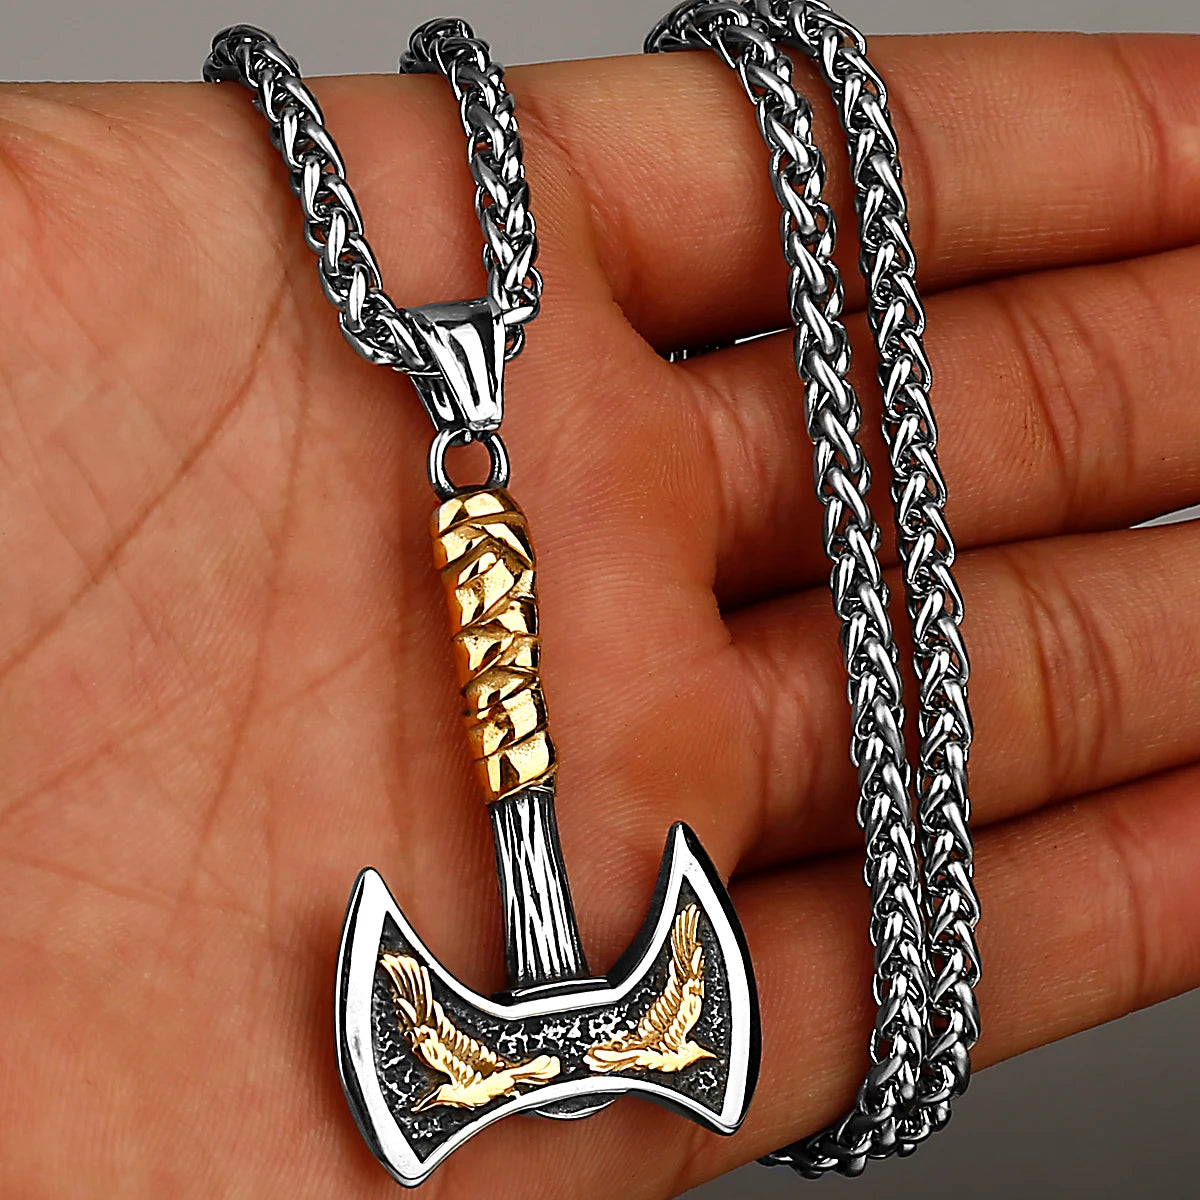 Viking Axe Necklace Pendant - Mythical Pieces Only Pendant / WJ 61